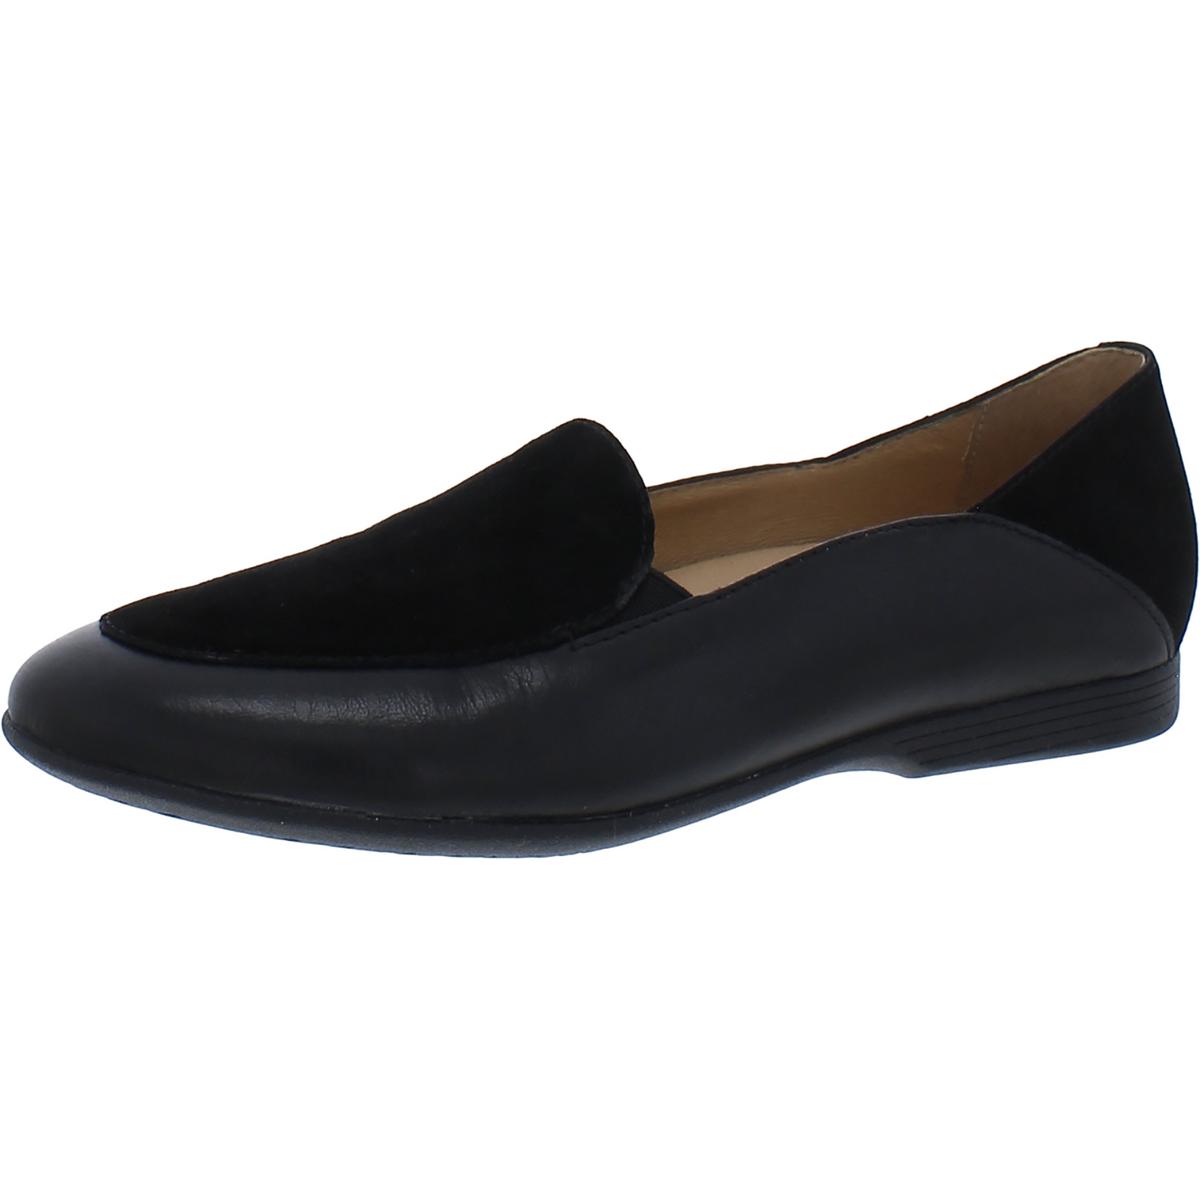 DANSKO Womens Leather and Suede Round Toe Mules